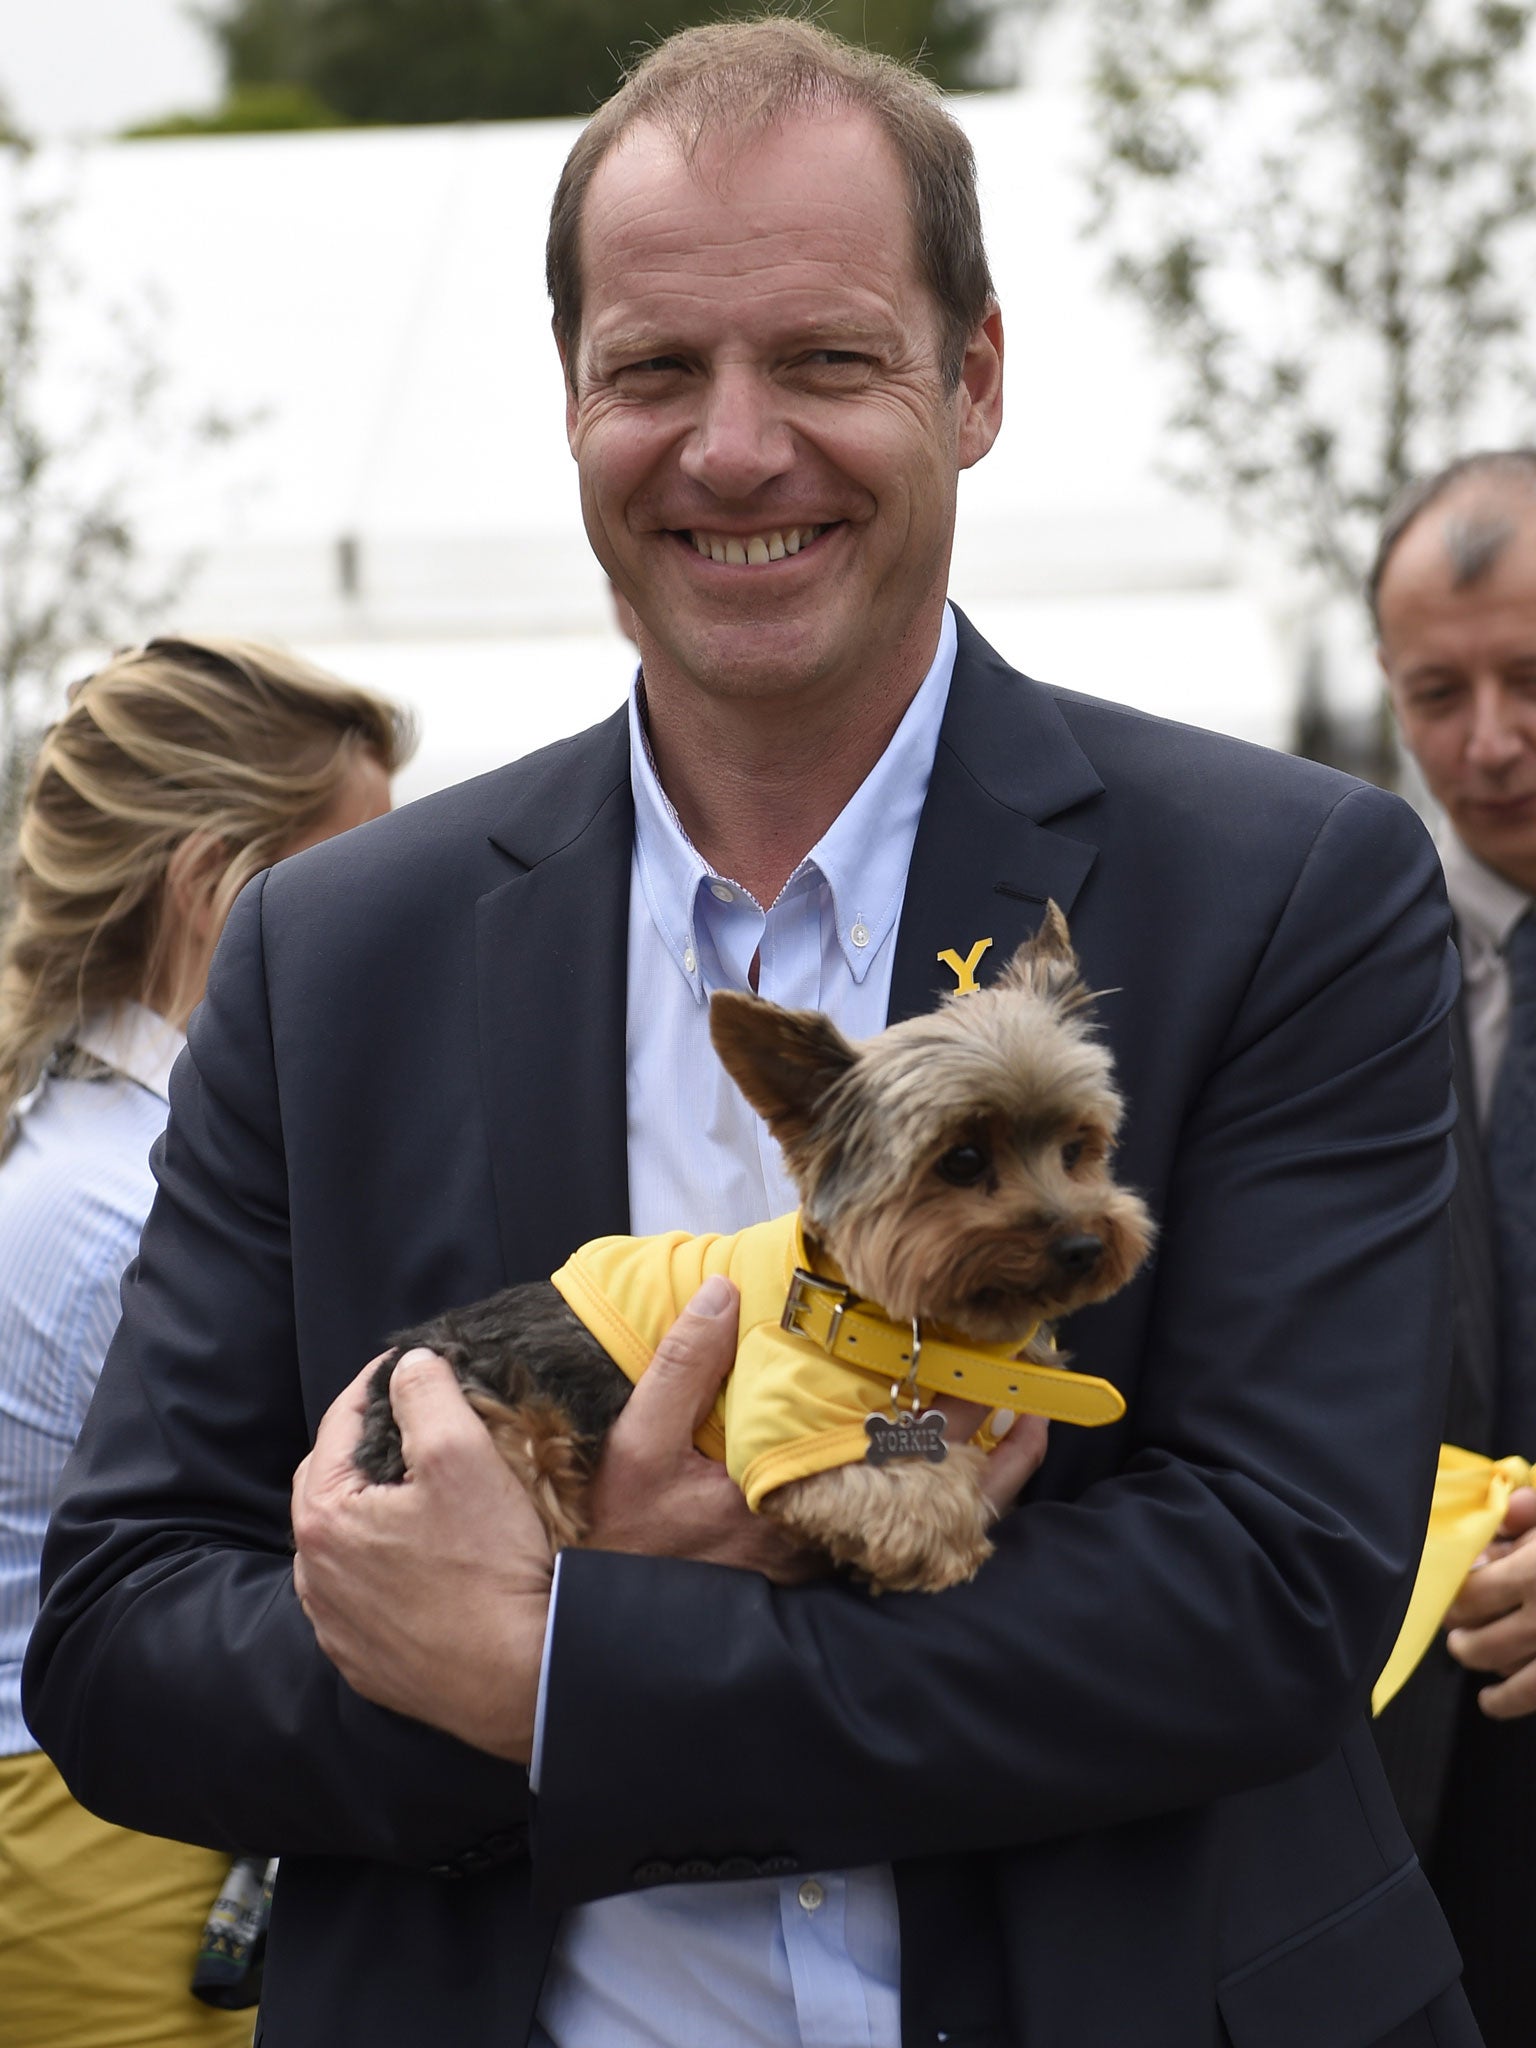 General director of the Tour de France, Christian Prudhomme, holds a Yorkshire Terrier